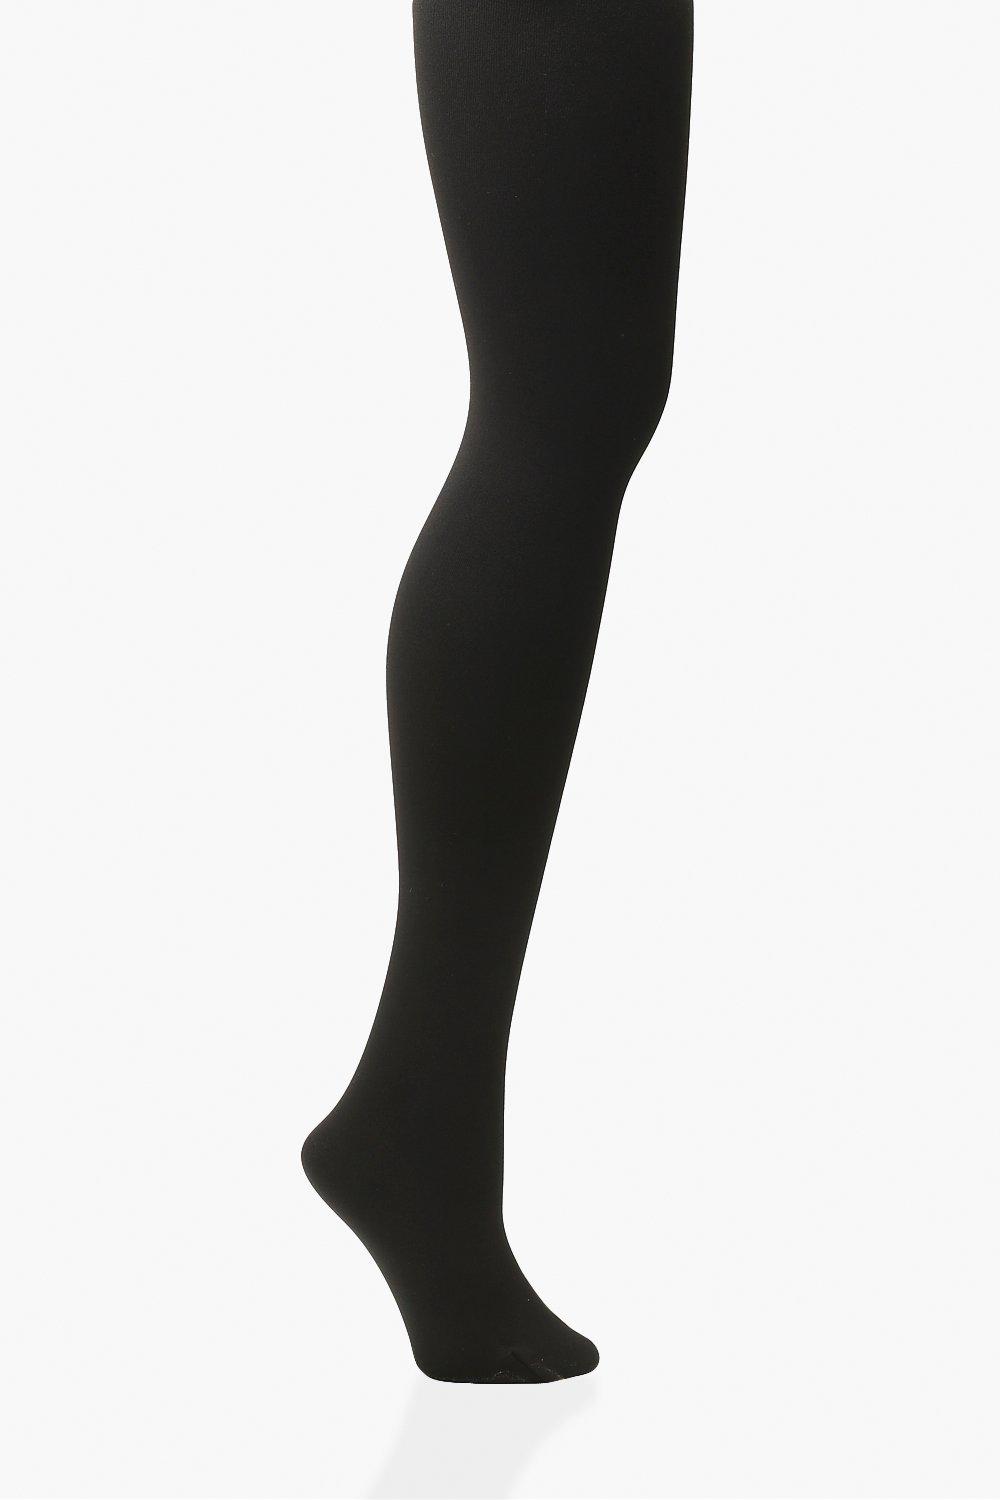 Boohoo Plus 300 Denier Thermal Tights- Black  - Size: ONE SIZE